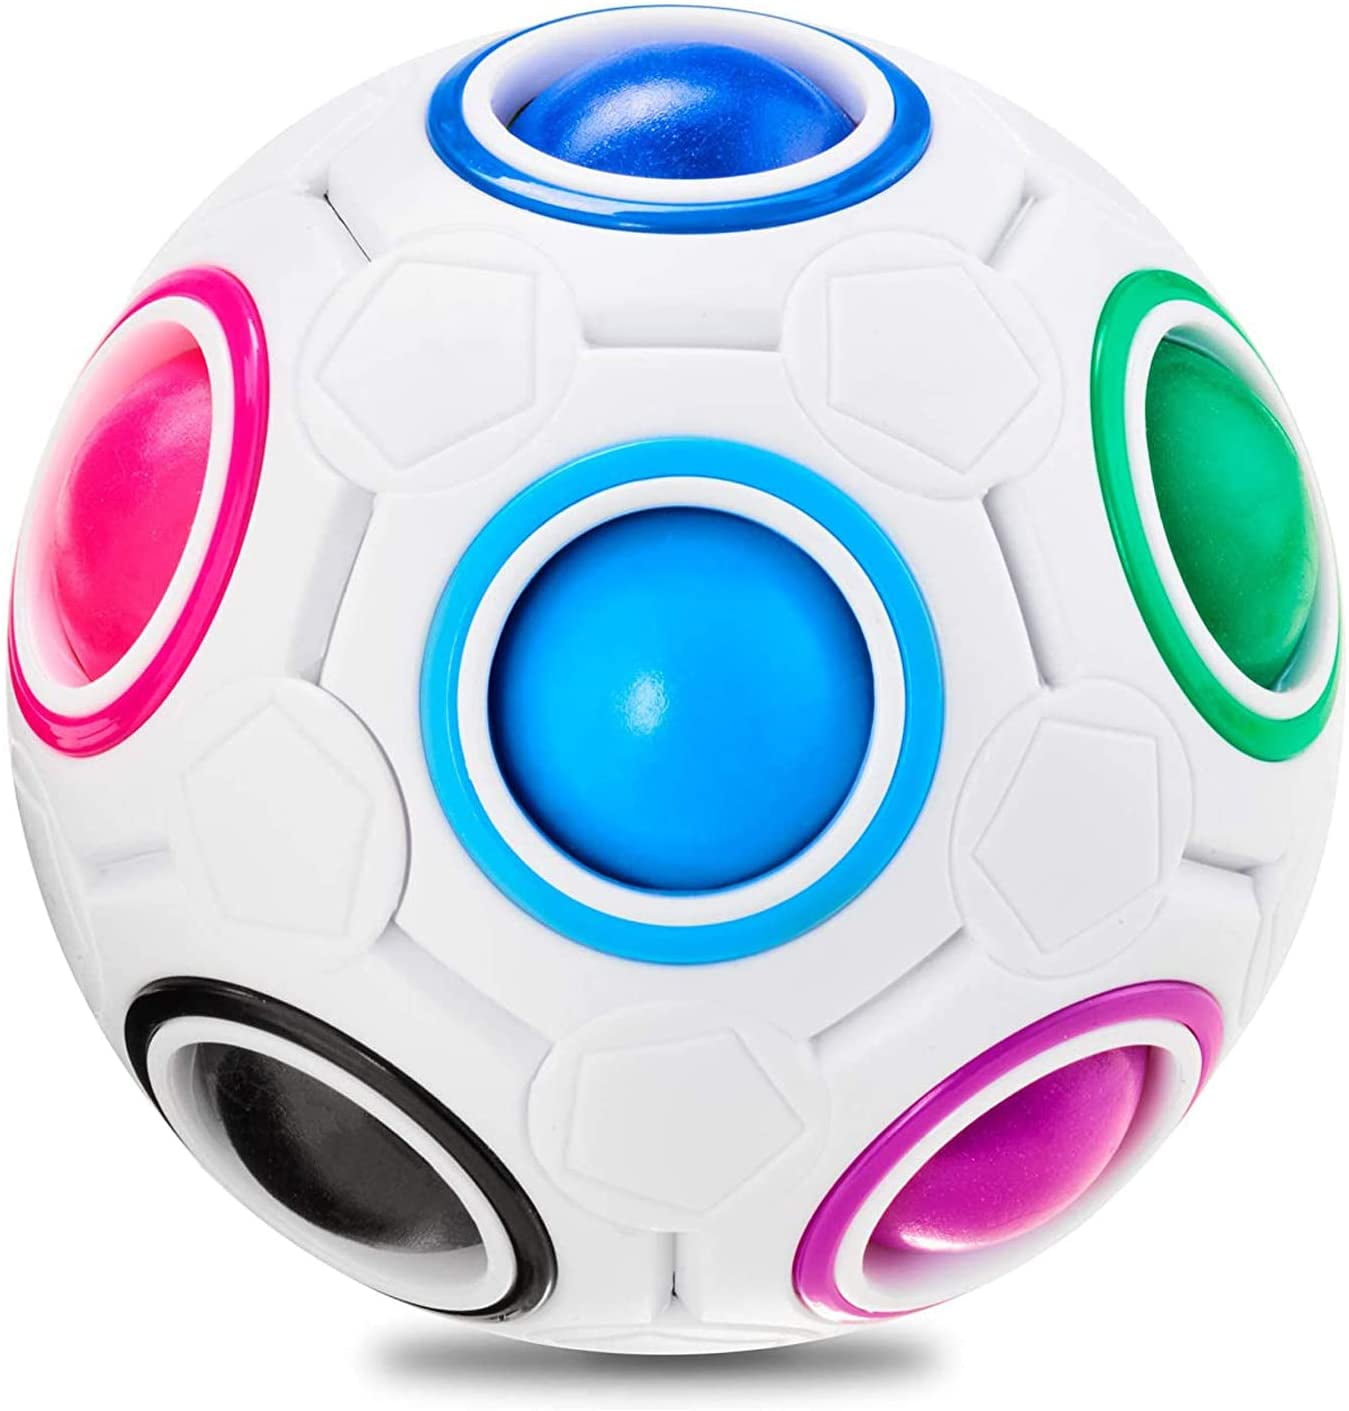 Coolzon Magic Rainbow Ball Fidget Ball New Version Puzzle Ball Magic Ball Speed Cube 3D Puzzle Fidget Toy for Adults & Kids White